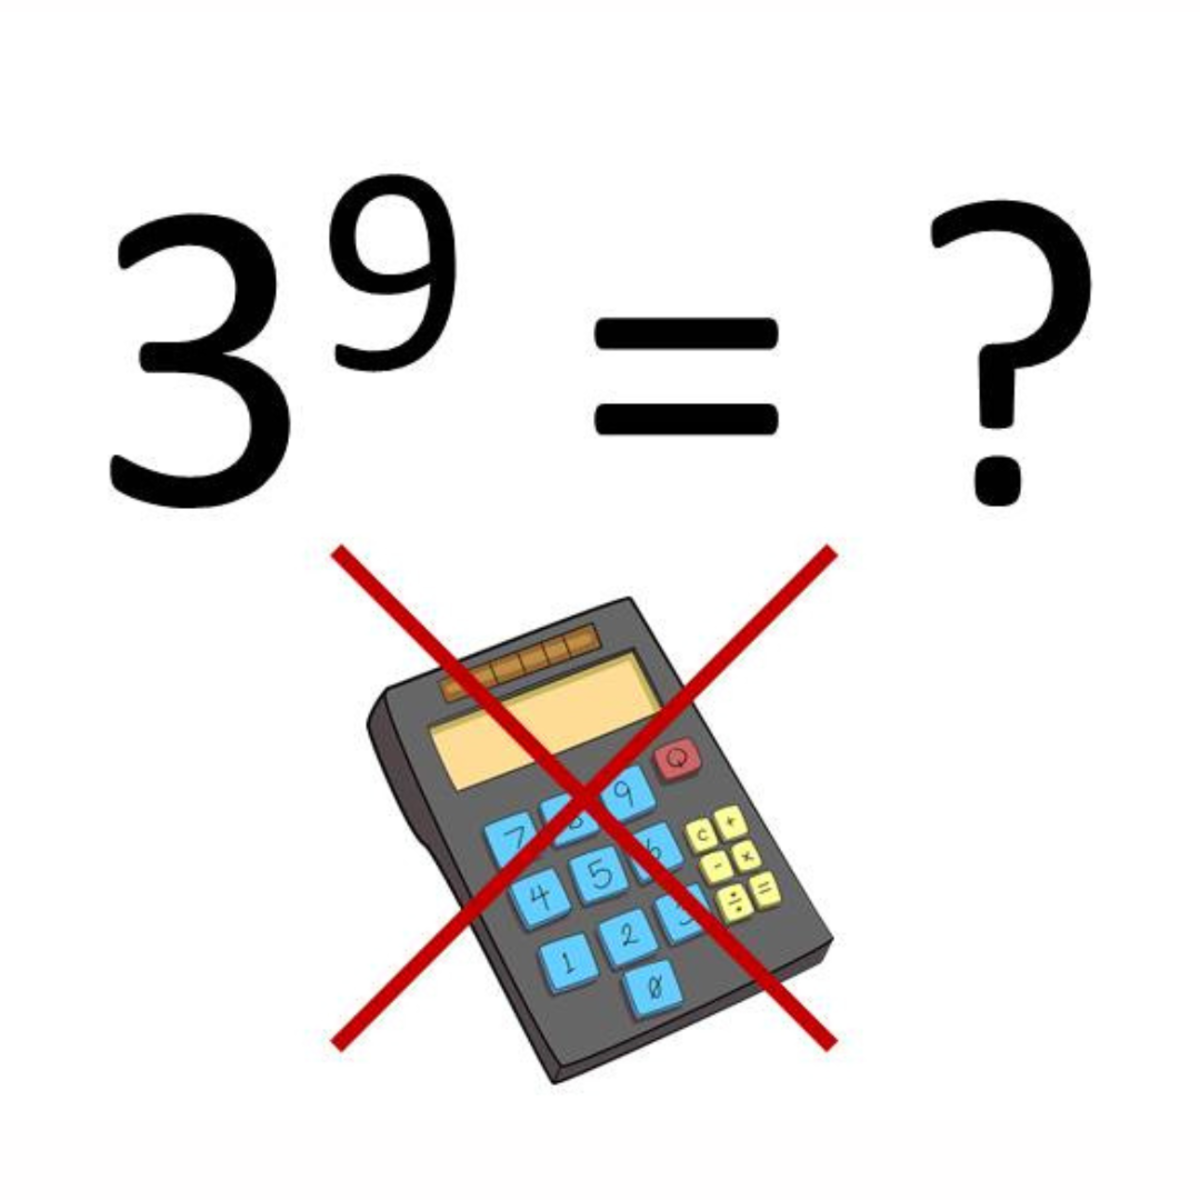 How To Find 3^9 Without Using a Calculator - Number Problems